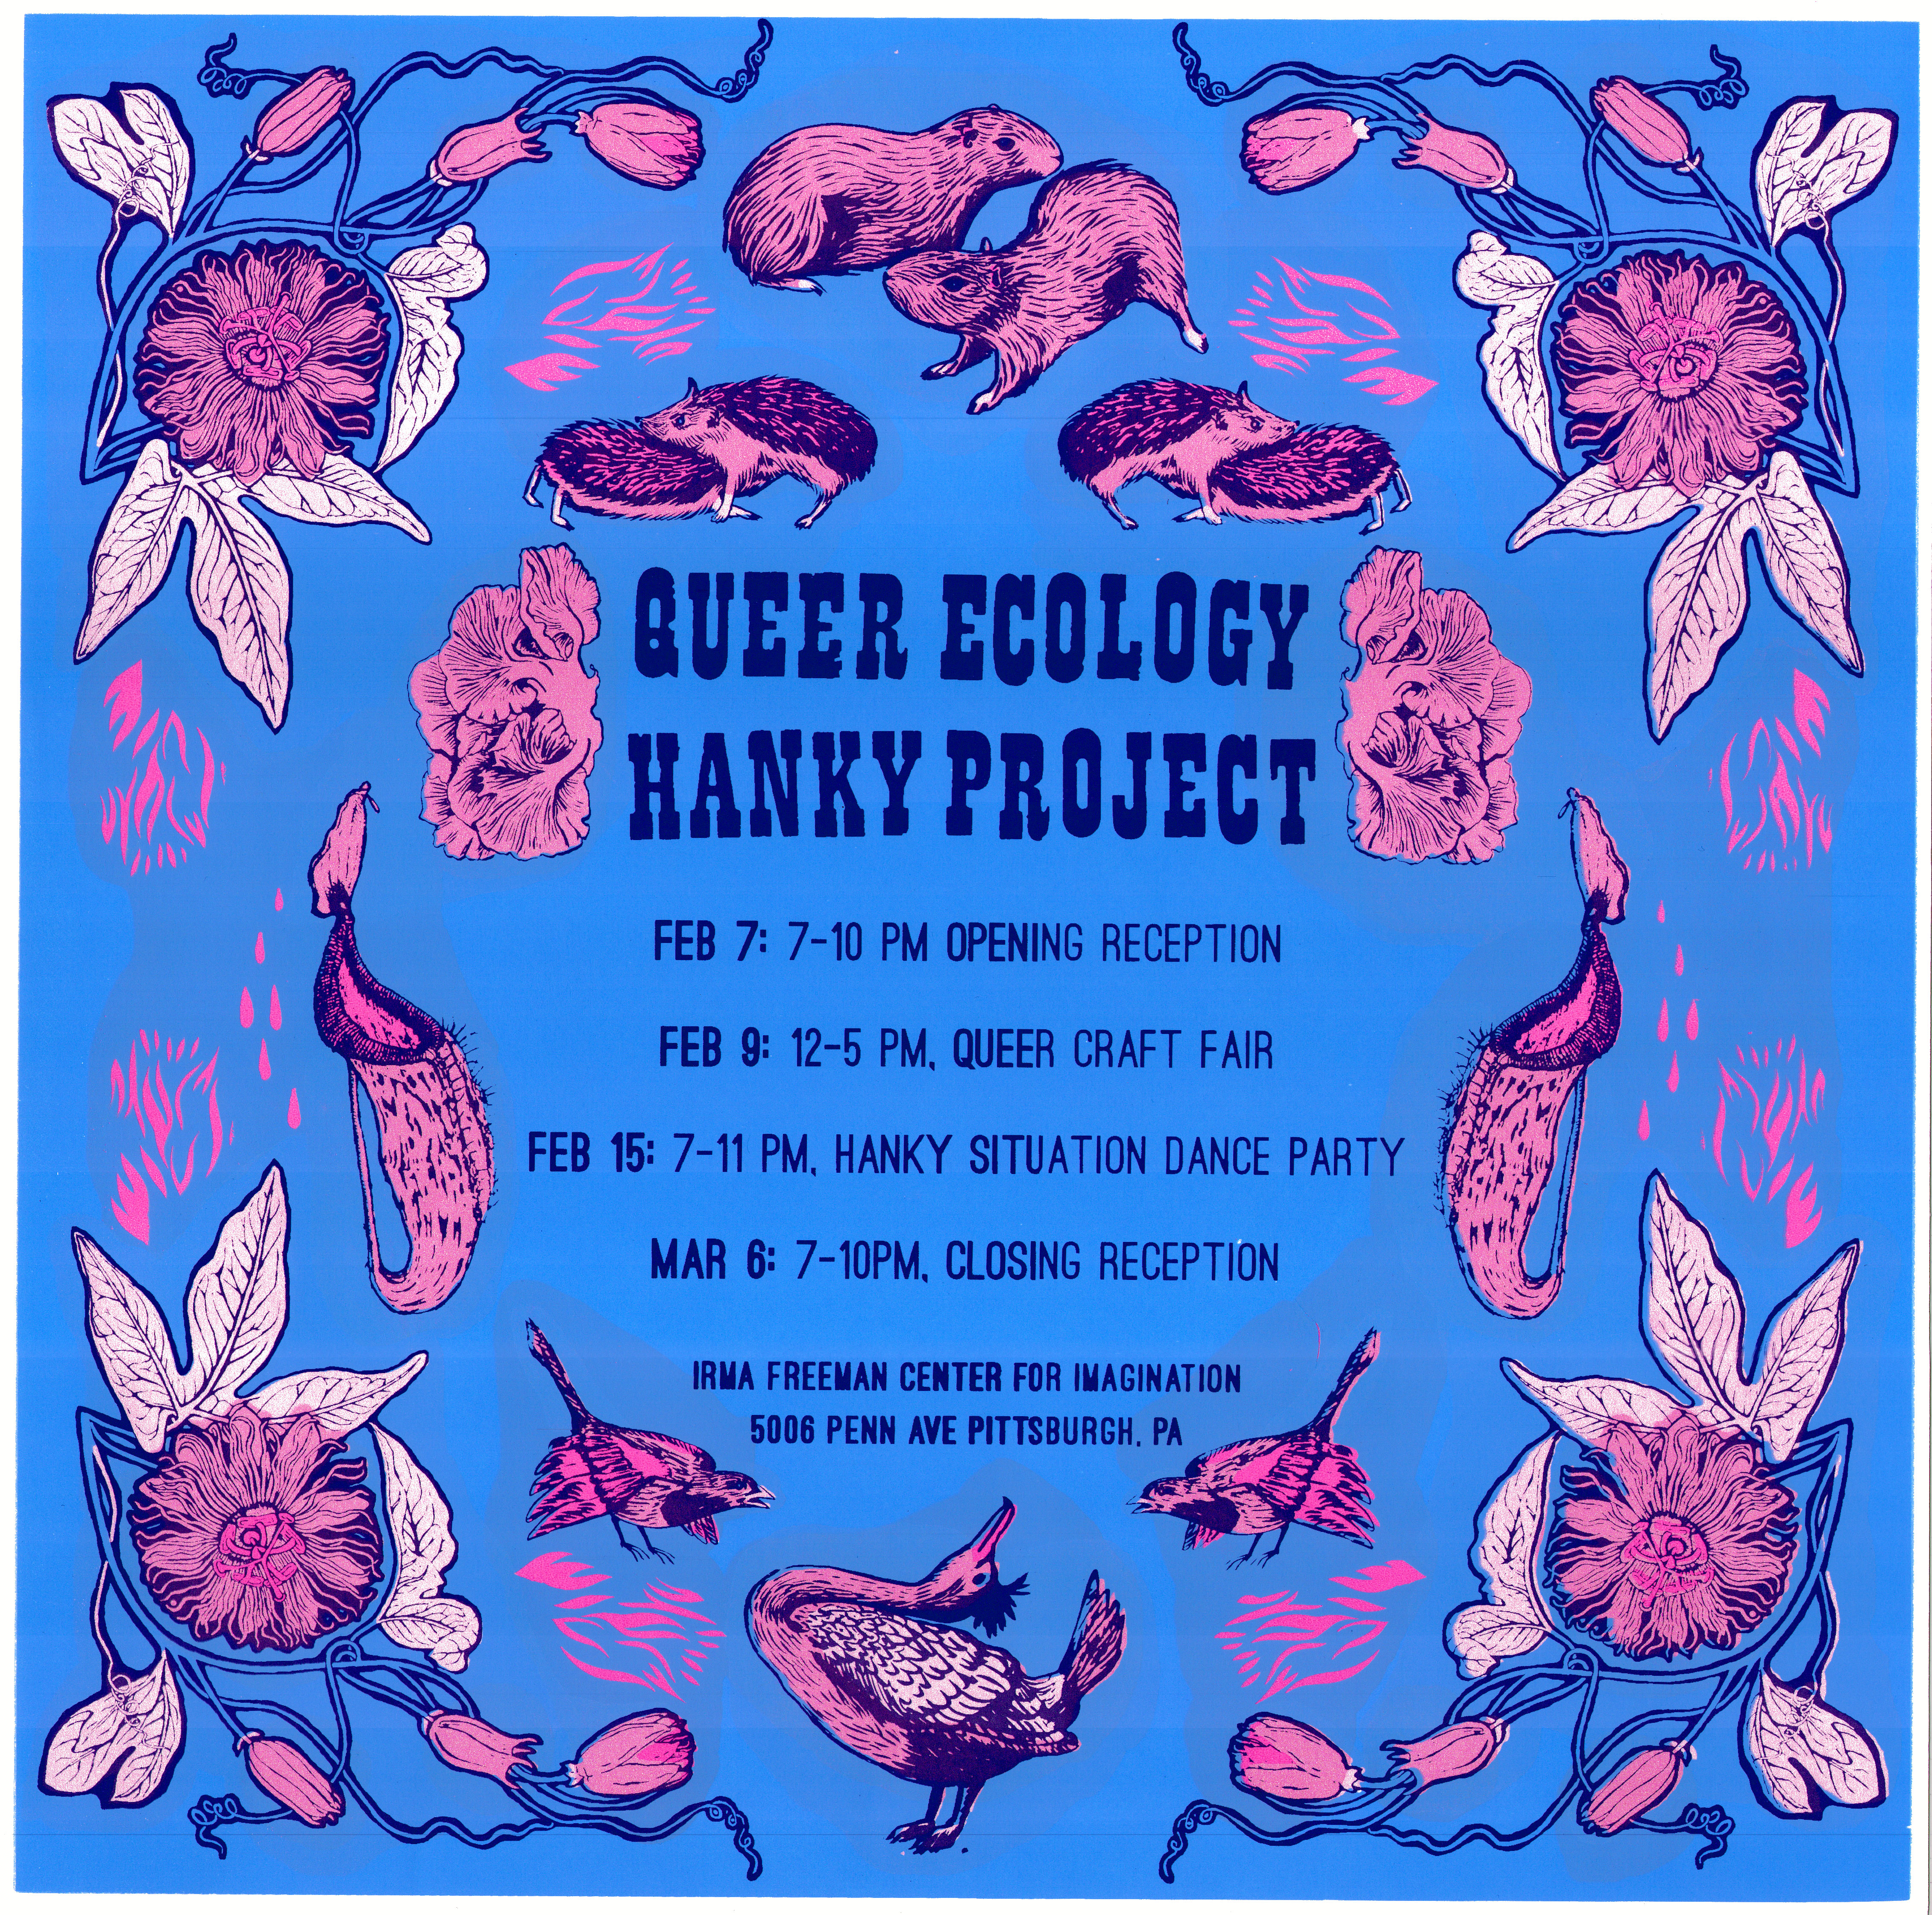 Color poster with queer ecology symbols.